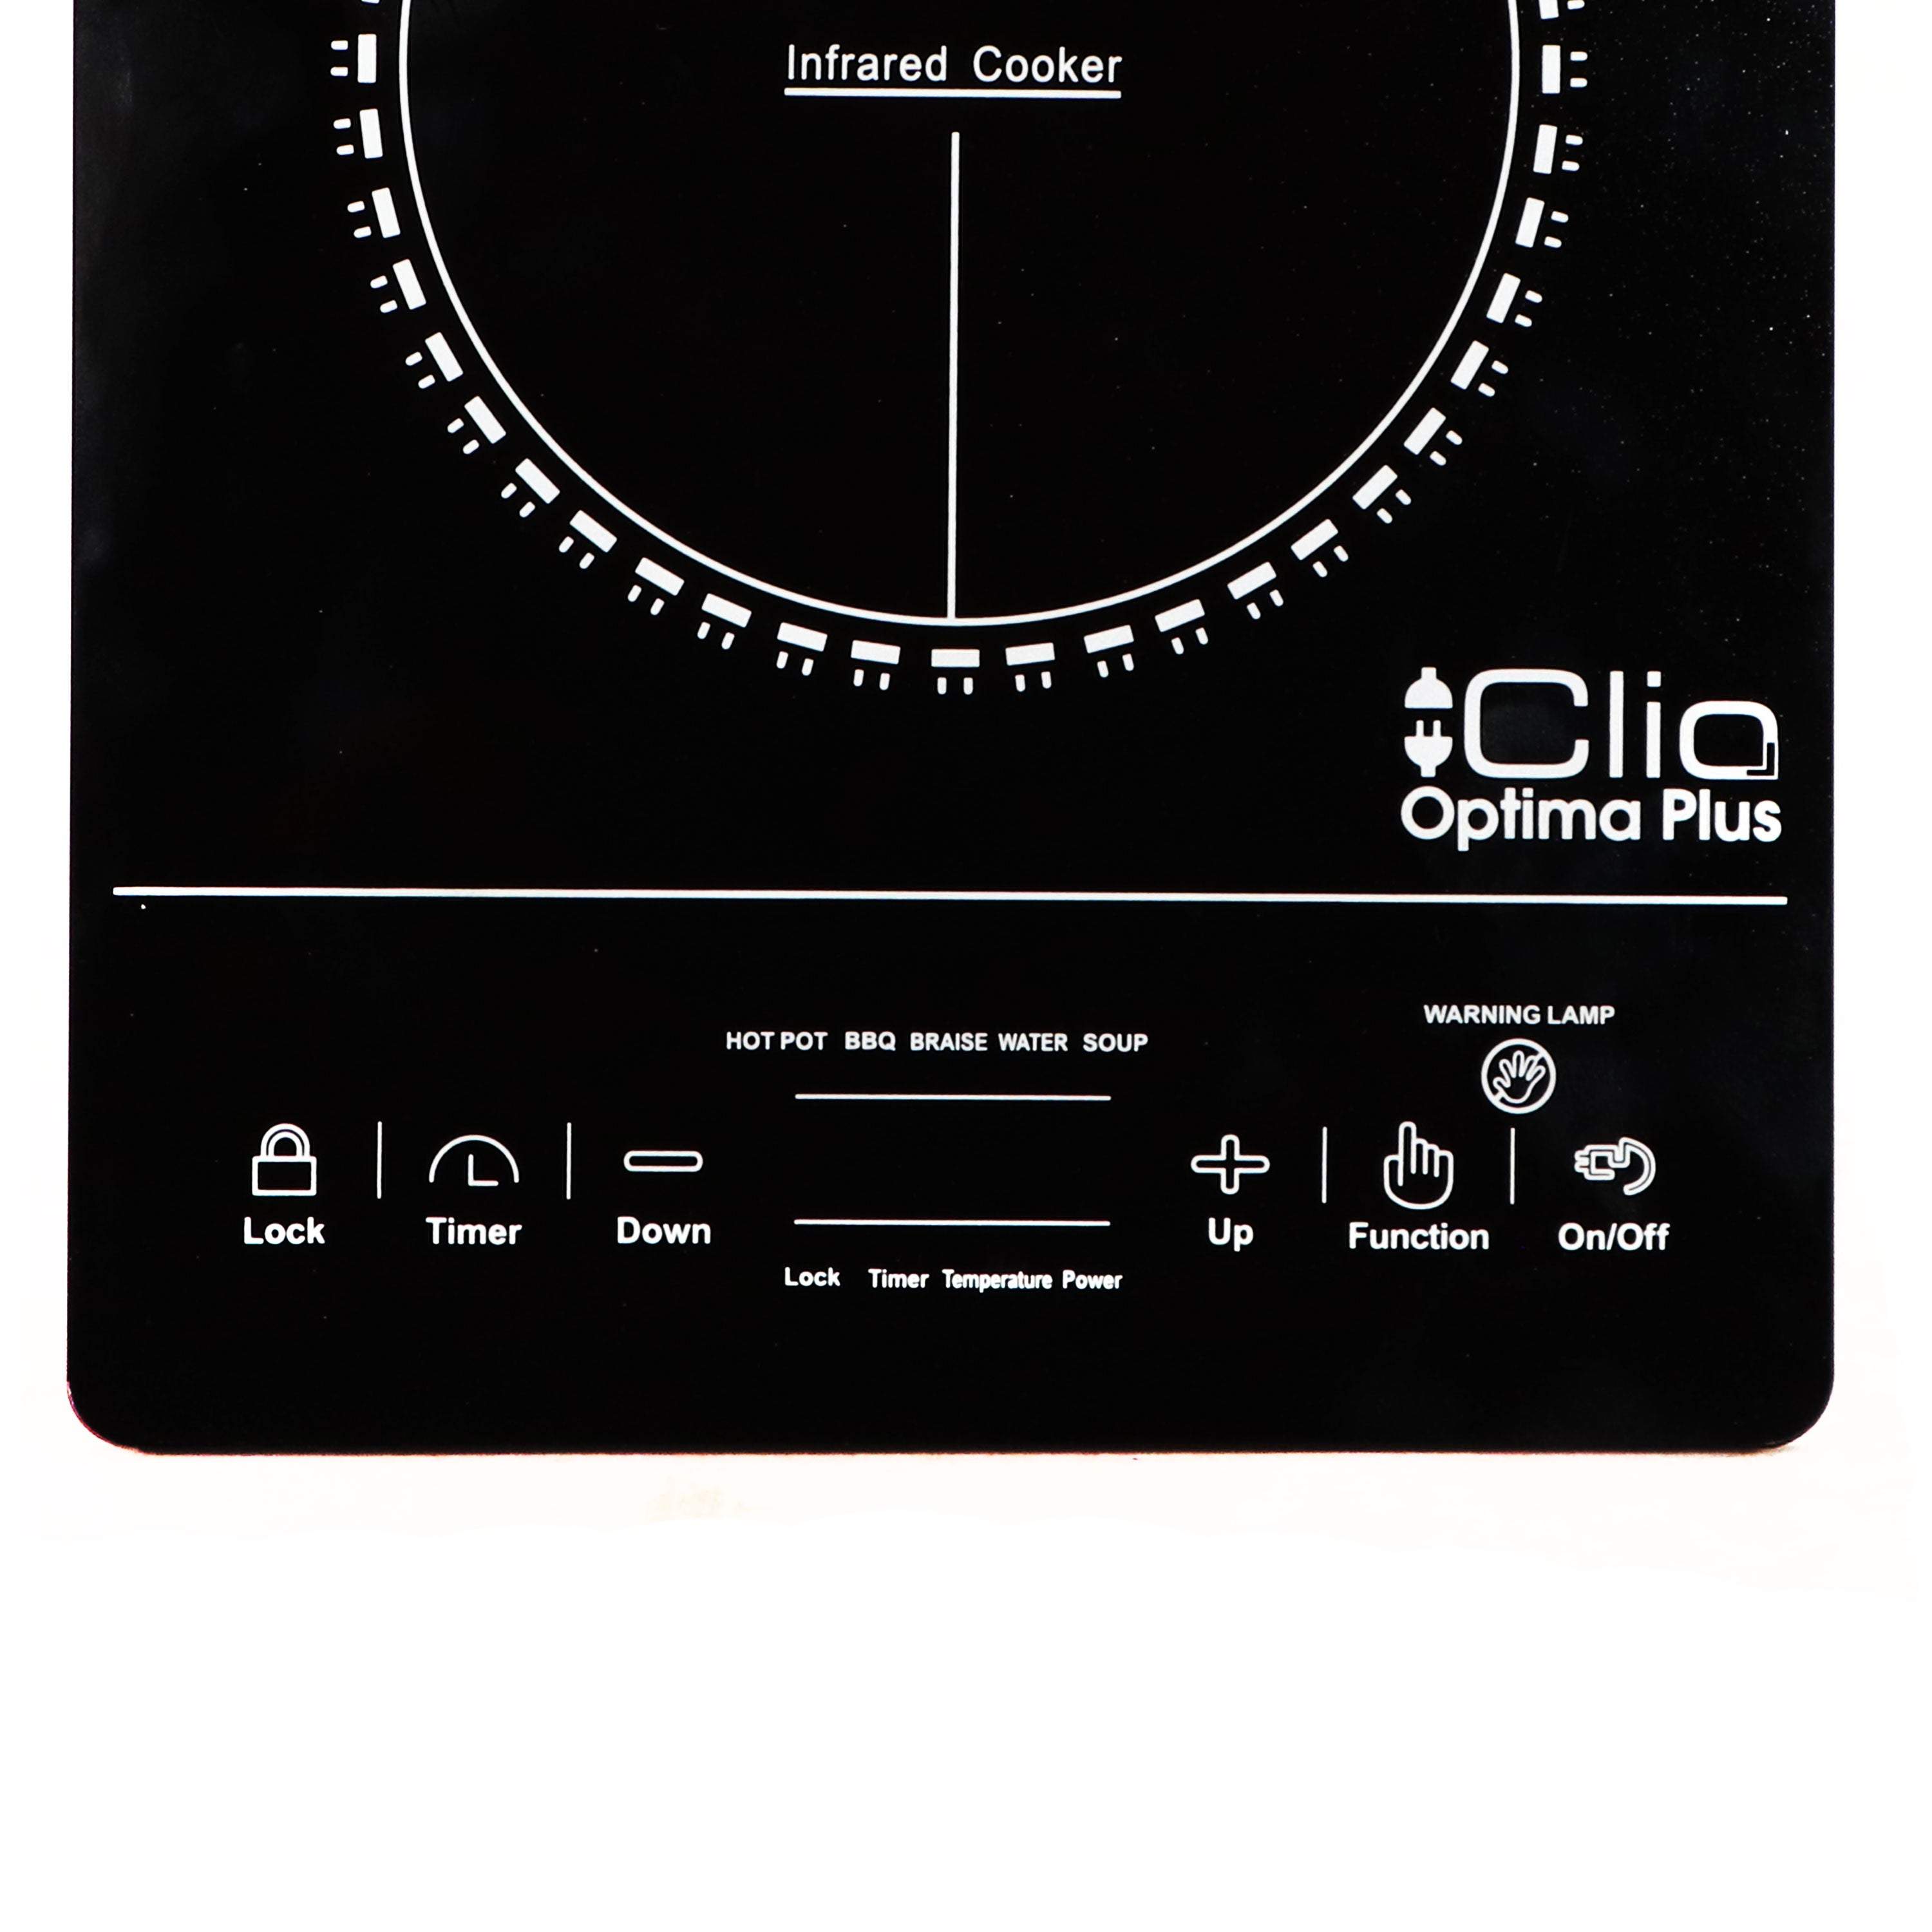 Clio Infrared Cooker 2000W-Royal Brands Co-